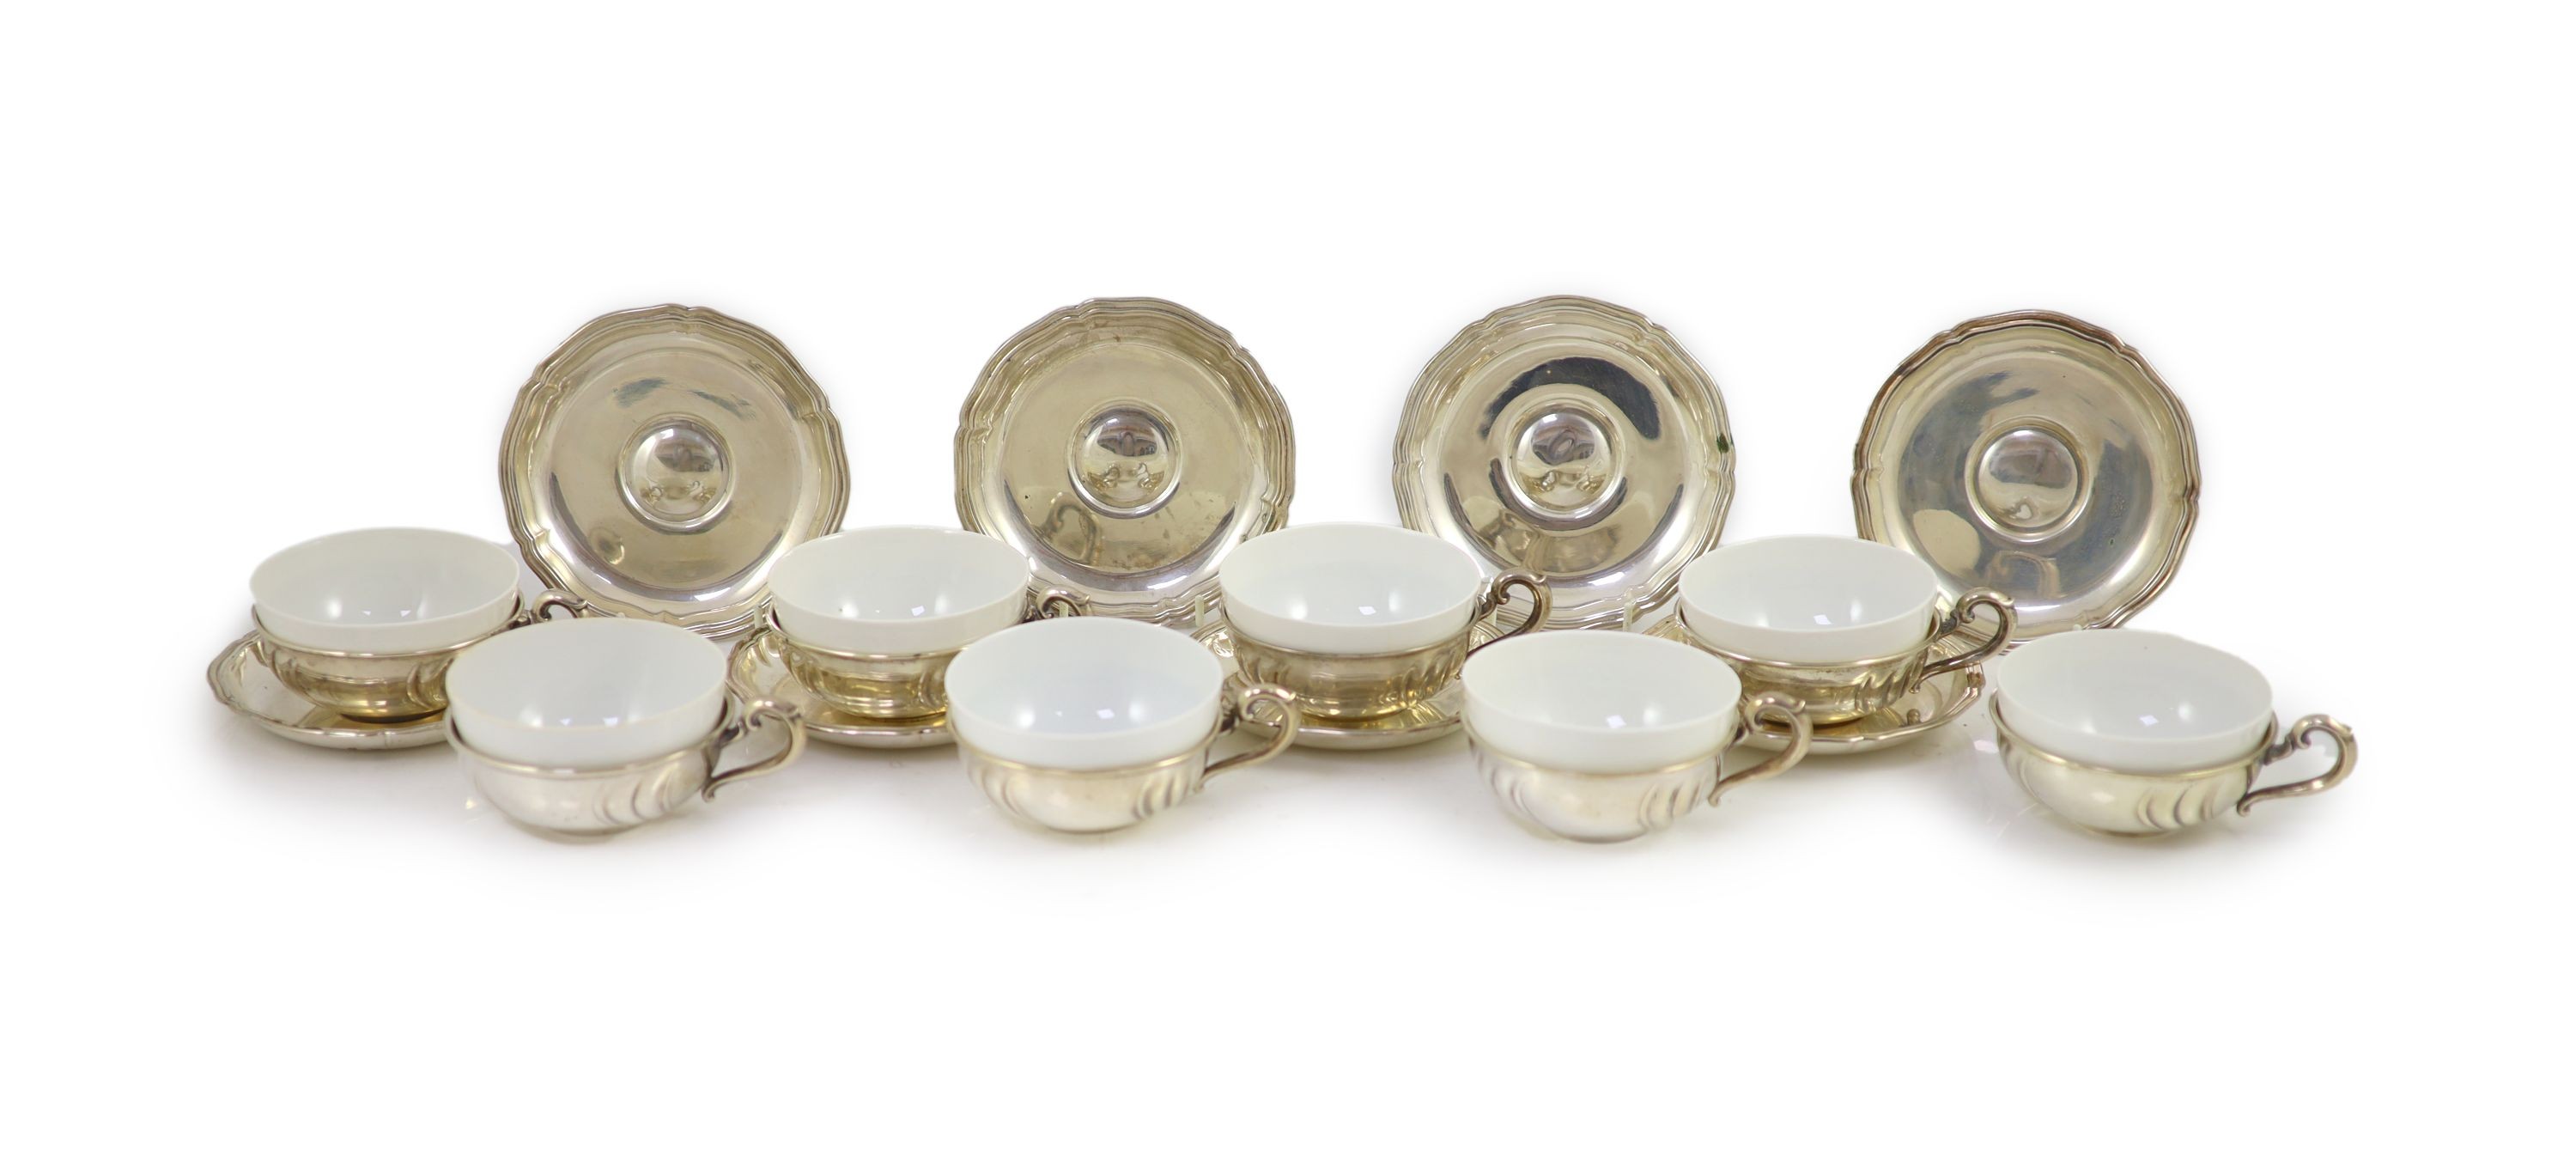 A set of eight German 800 standard silver cups and saucers, by Adolf Kander, with white porcelain liners